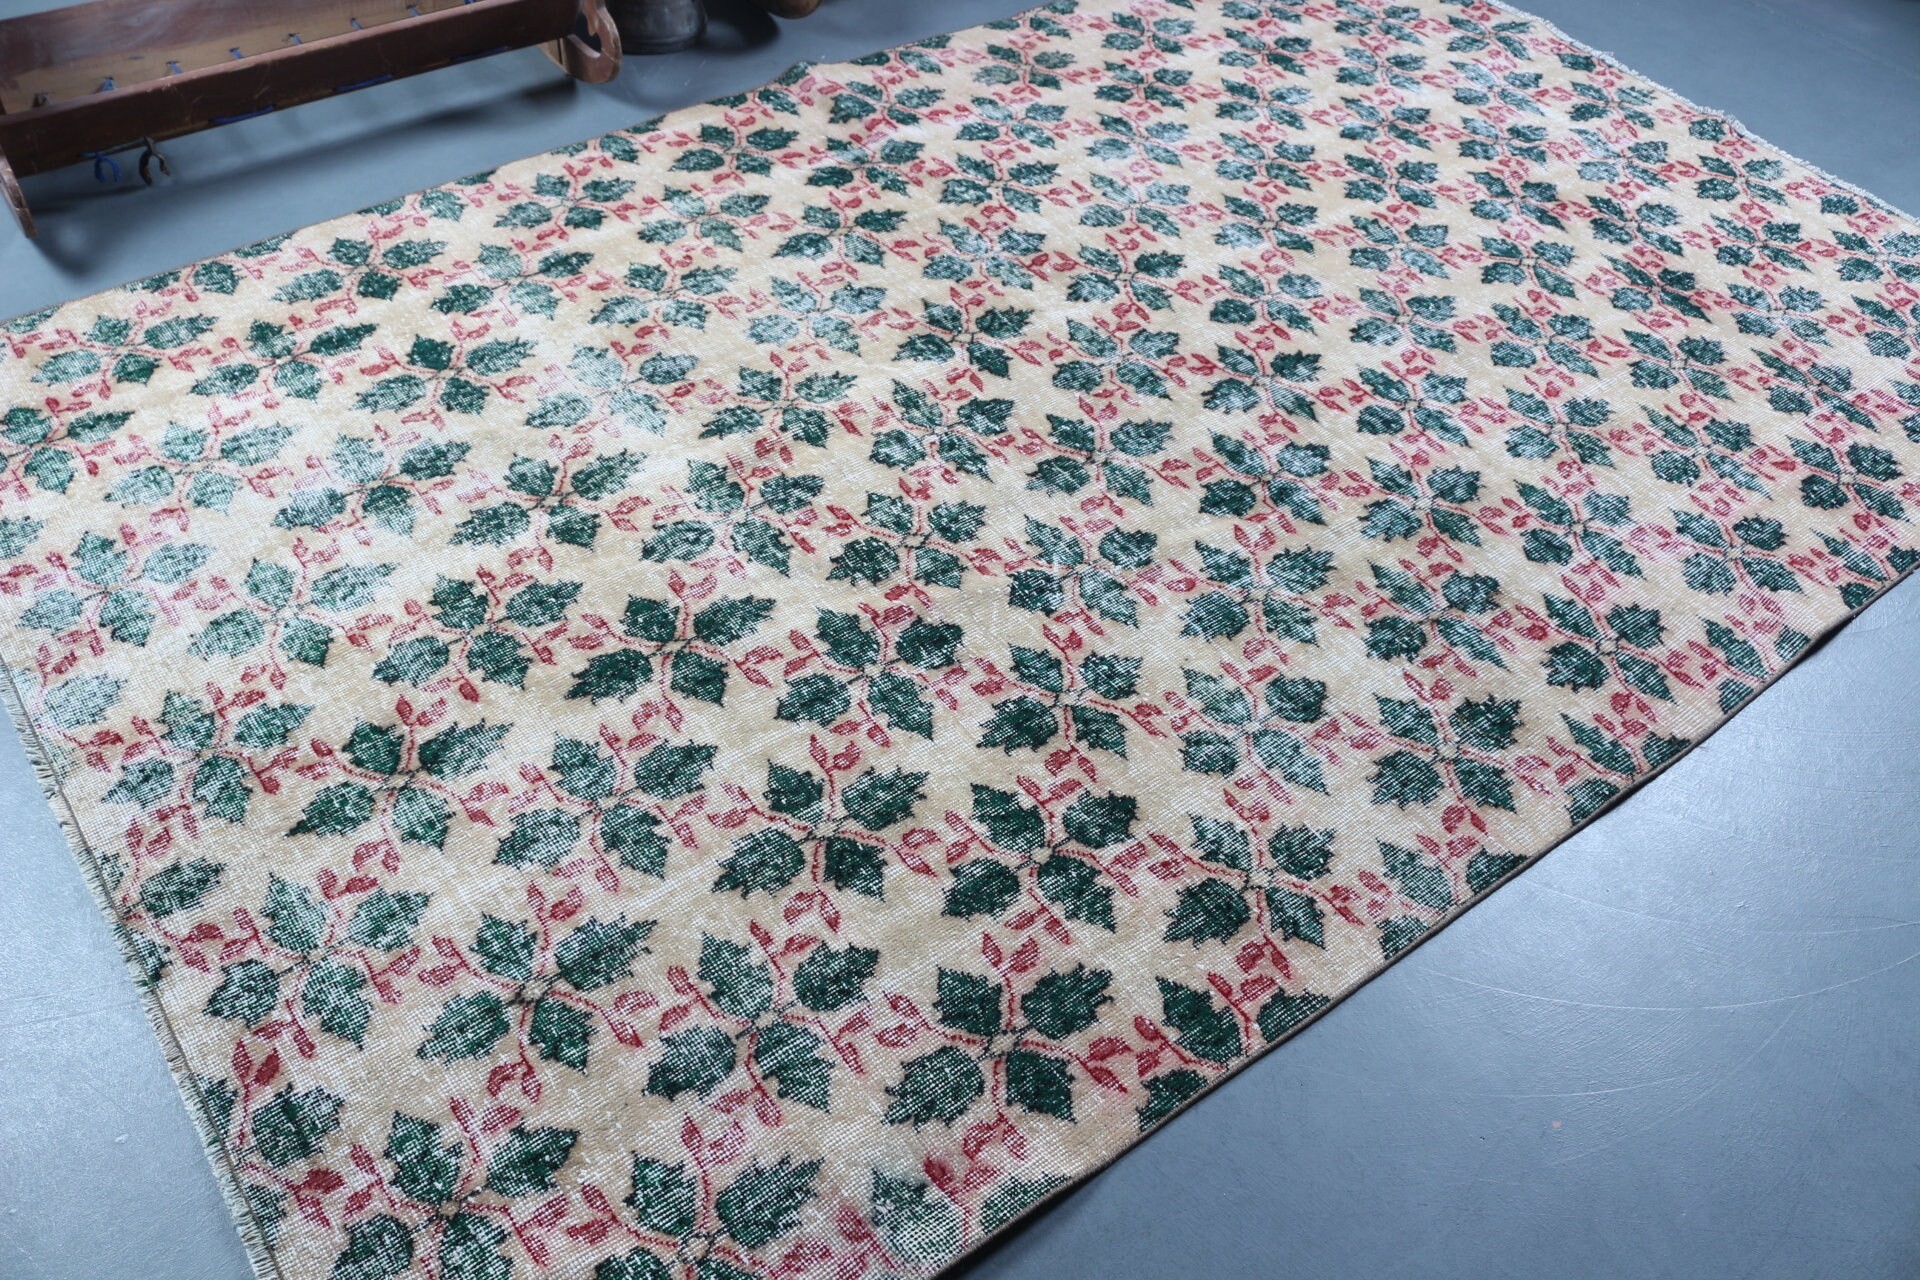 Kitchen Rug, Turkish Rug, Green Home Decor Rugs, Living Room Rugs, Vintage Rugs, Dining Room Rugs, 6x9.6 ft Large Rugs